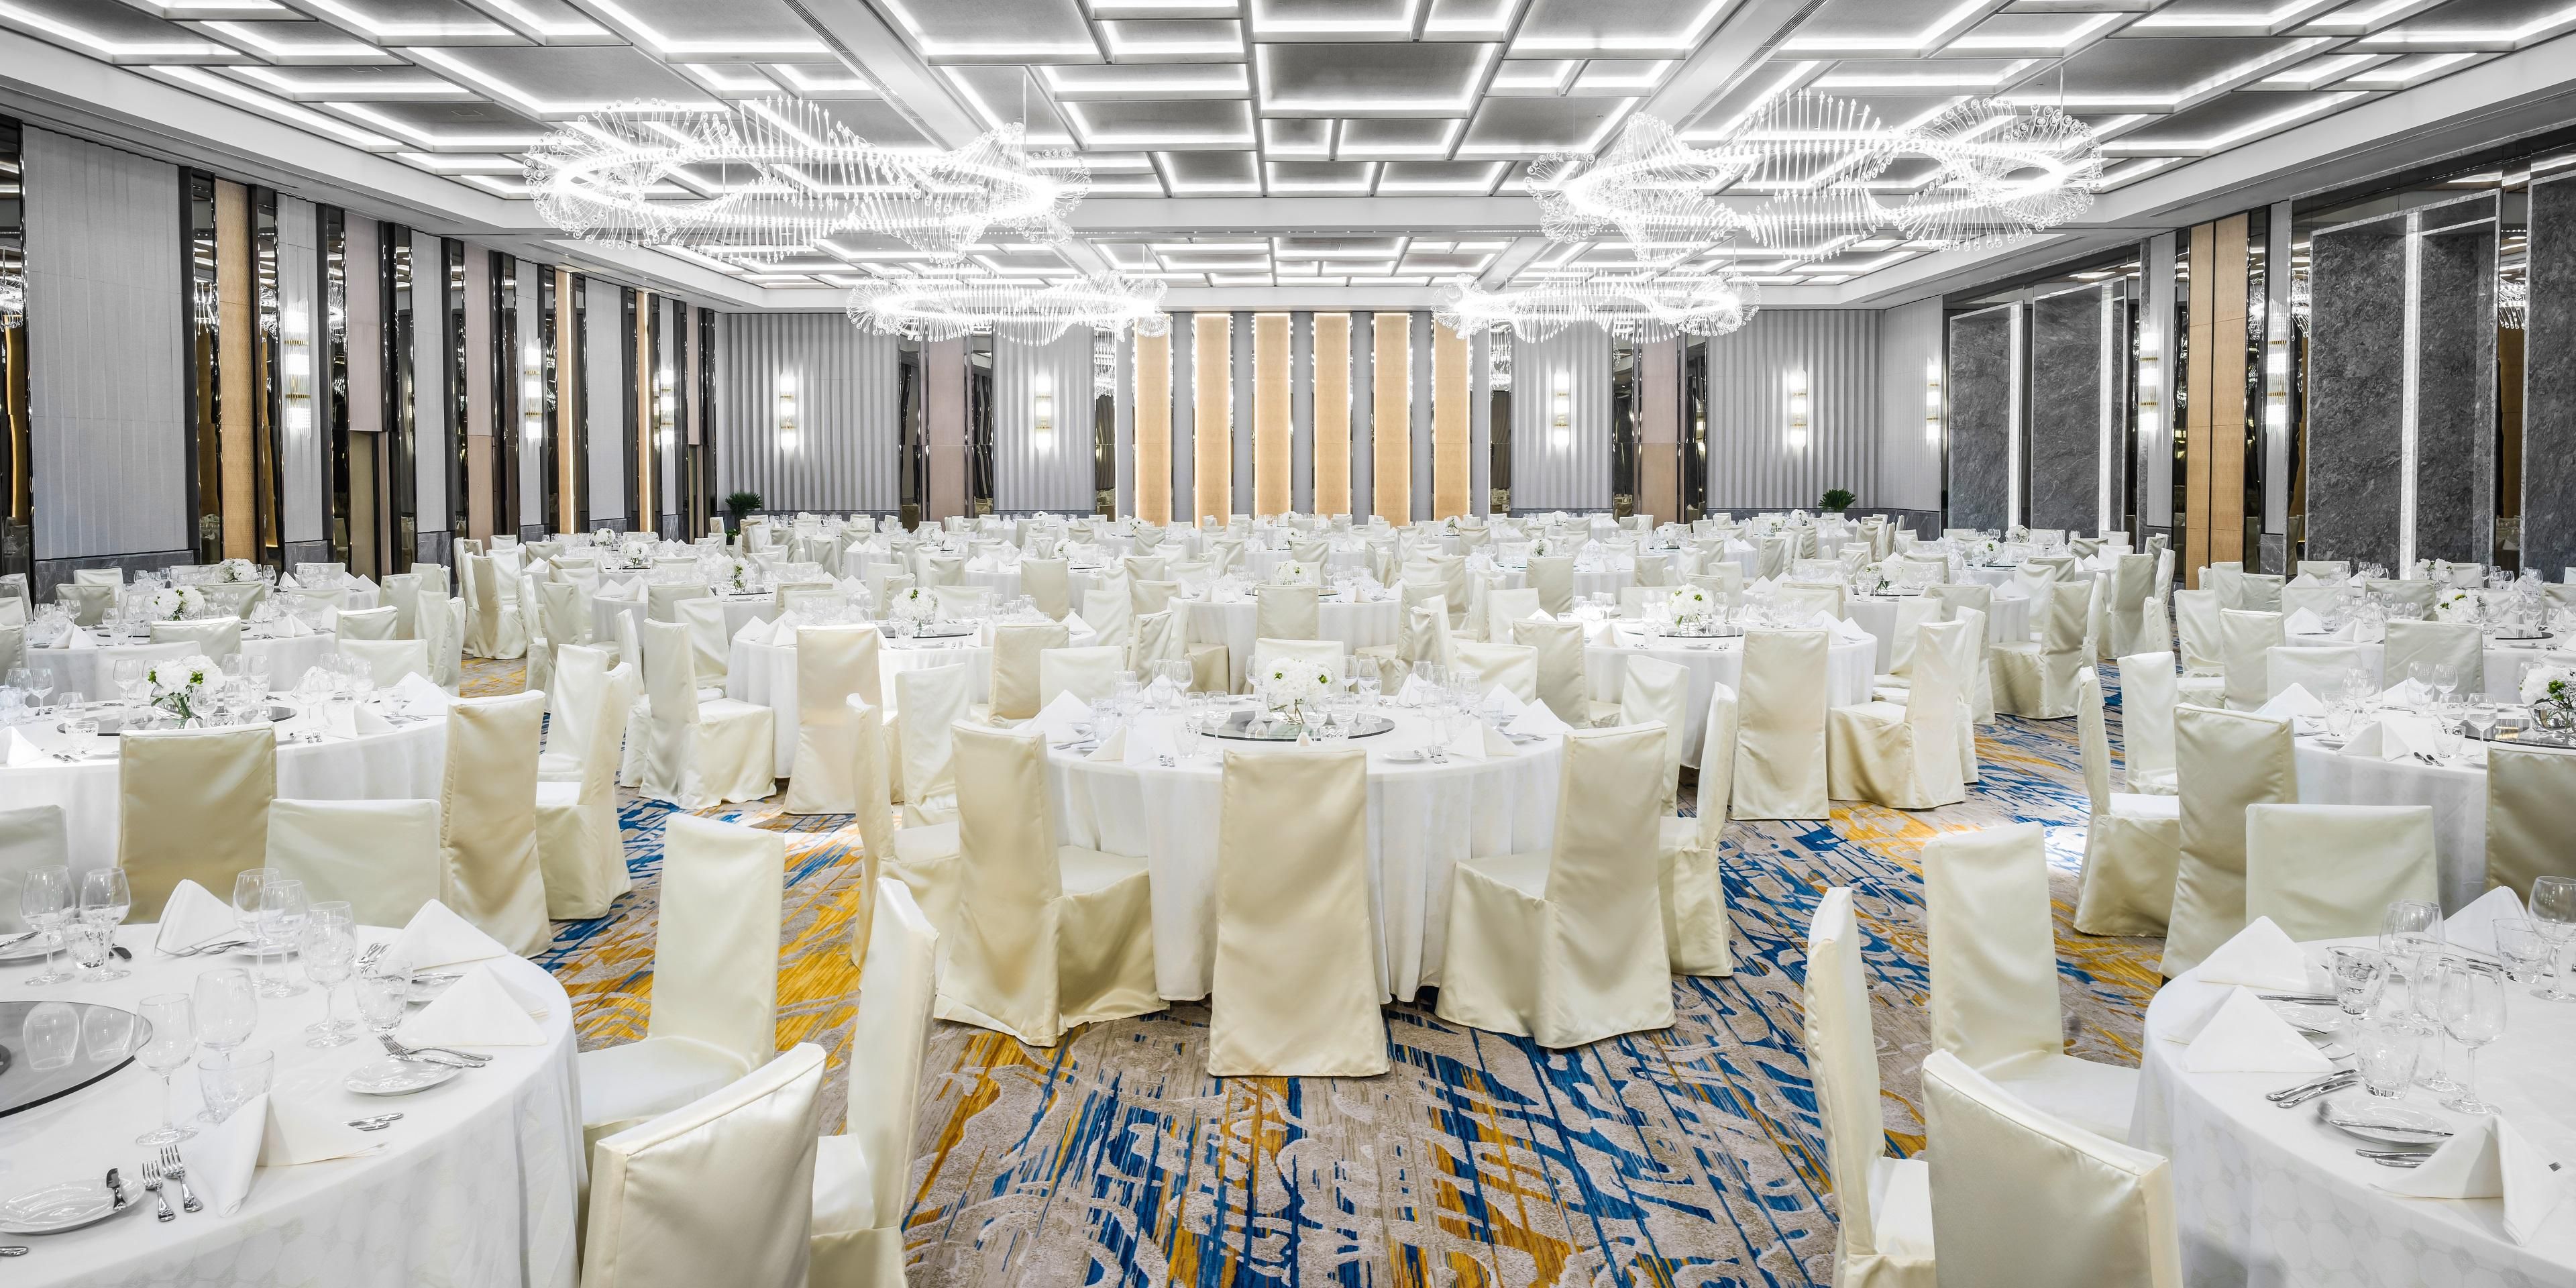 The resort features over 2,300 sqm of distinctive indoor event venues that include the Grand Ballroom, Junior Ballroom, meeting rooms, board rooms, and the island’s only theatre. Additionally, there are numerous outdoor venues including poolside and beach.